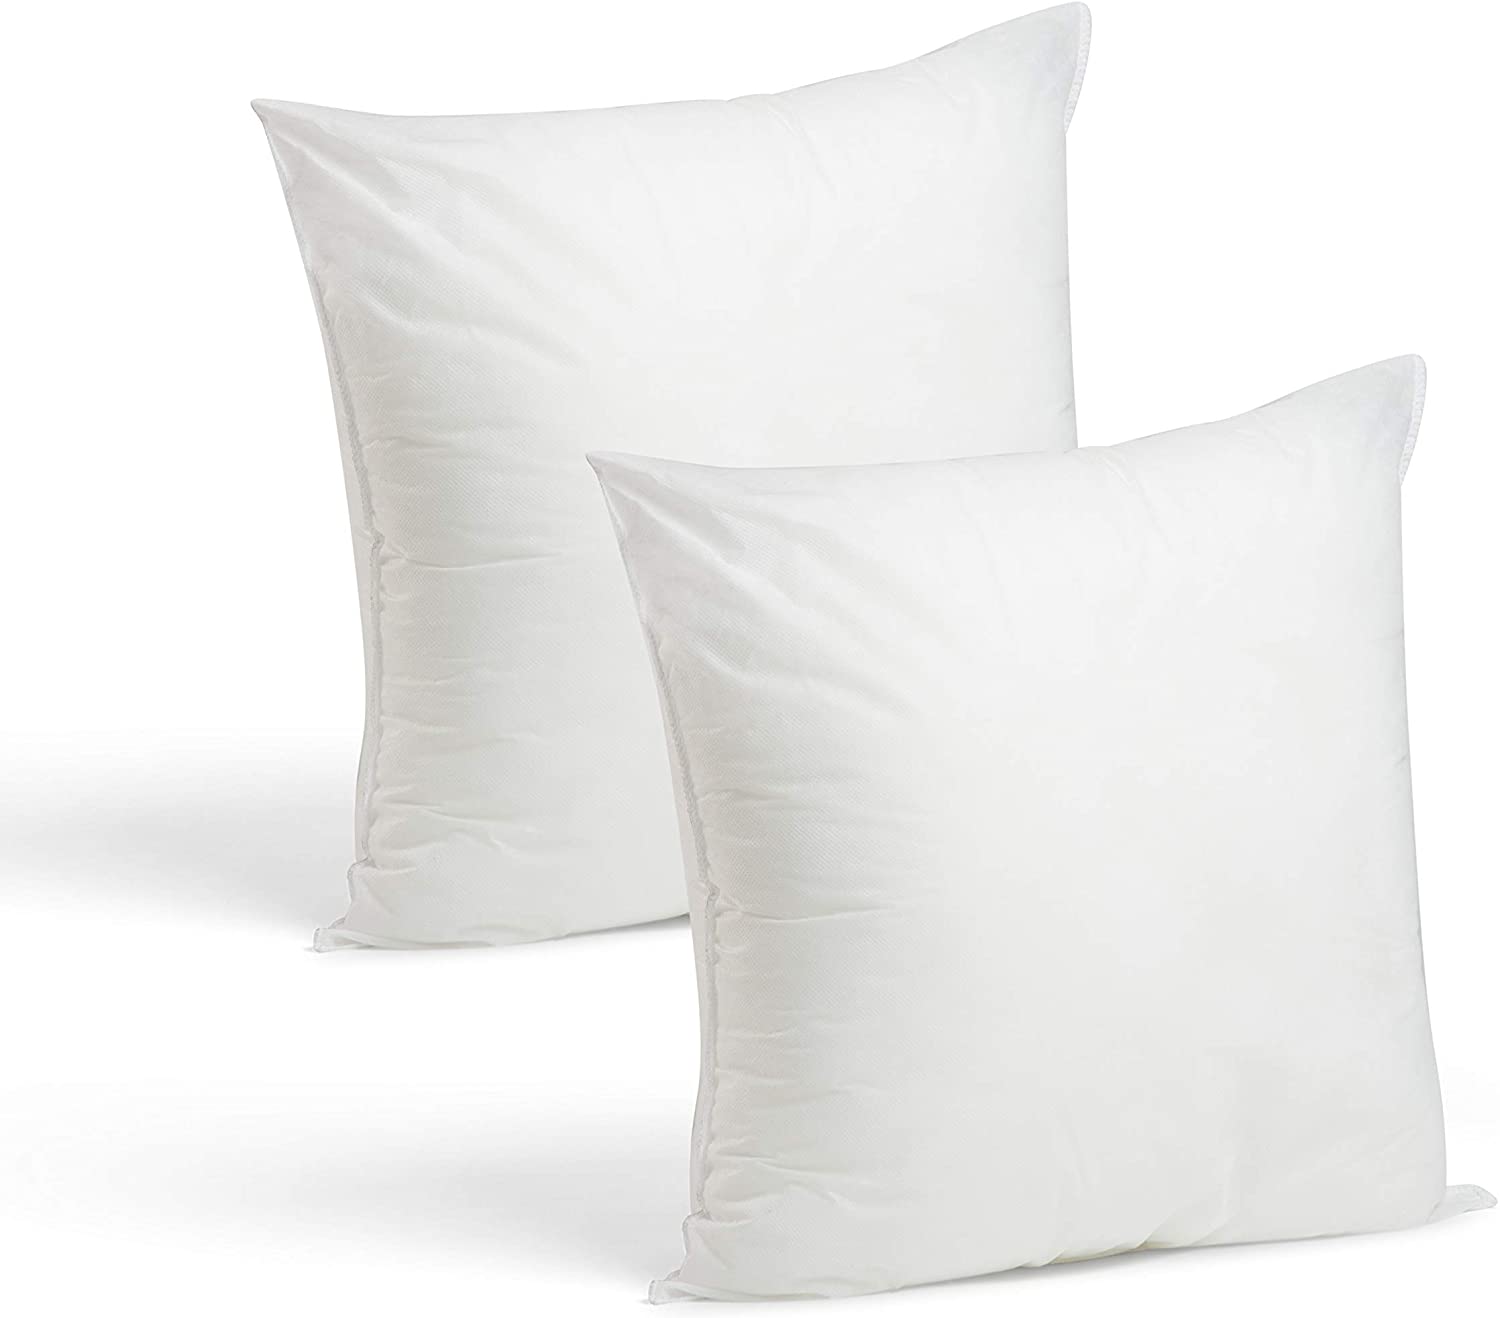 Foamily Firm Hypoallergenic Throw Pillows 18×18-Inch, 2-Pack